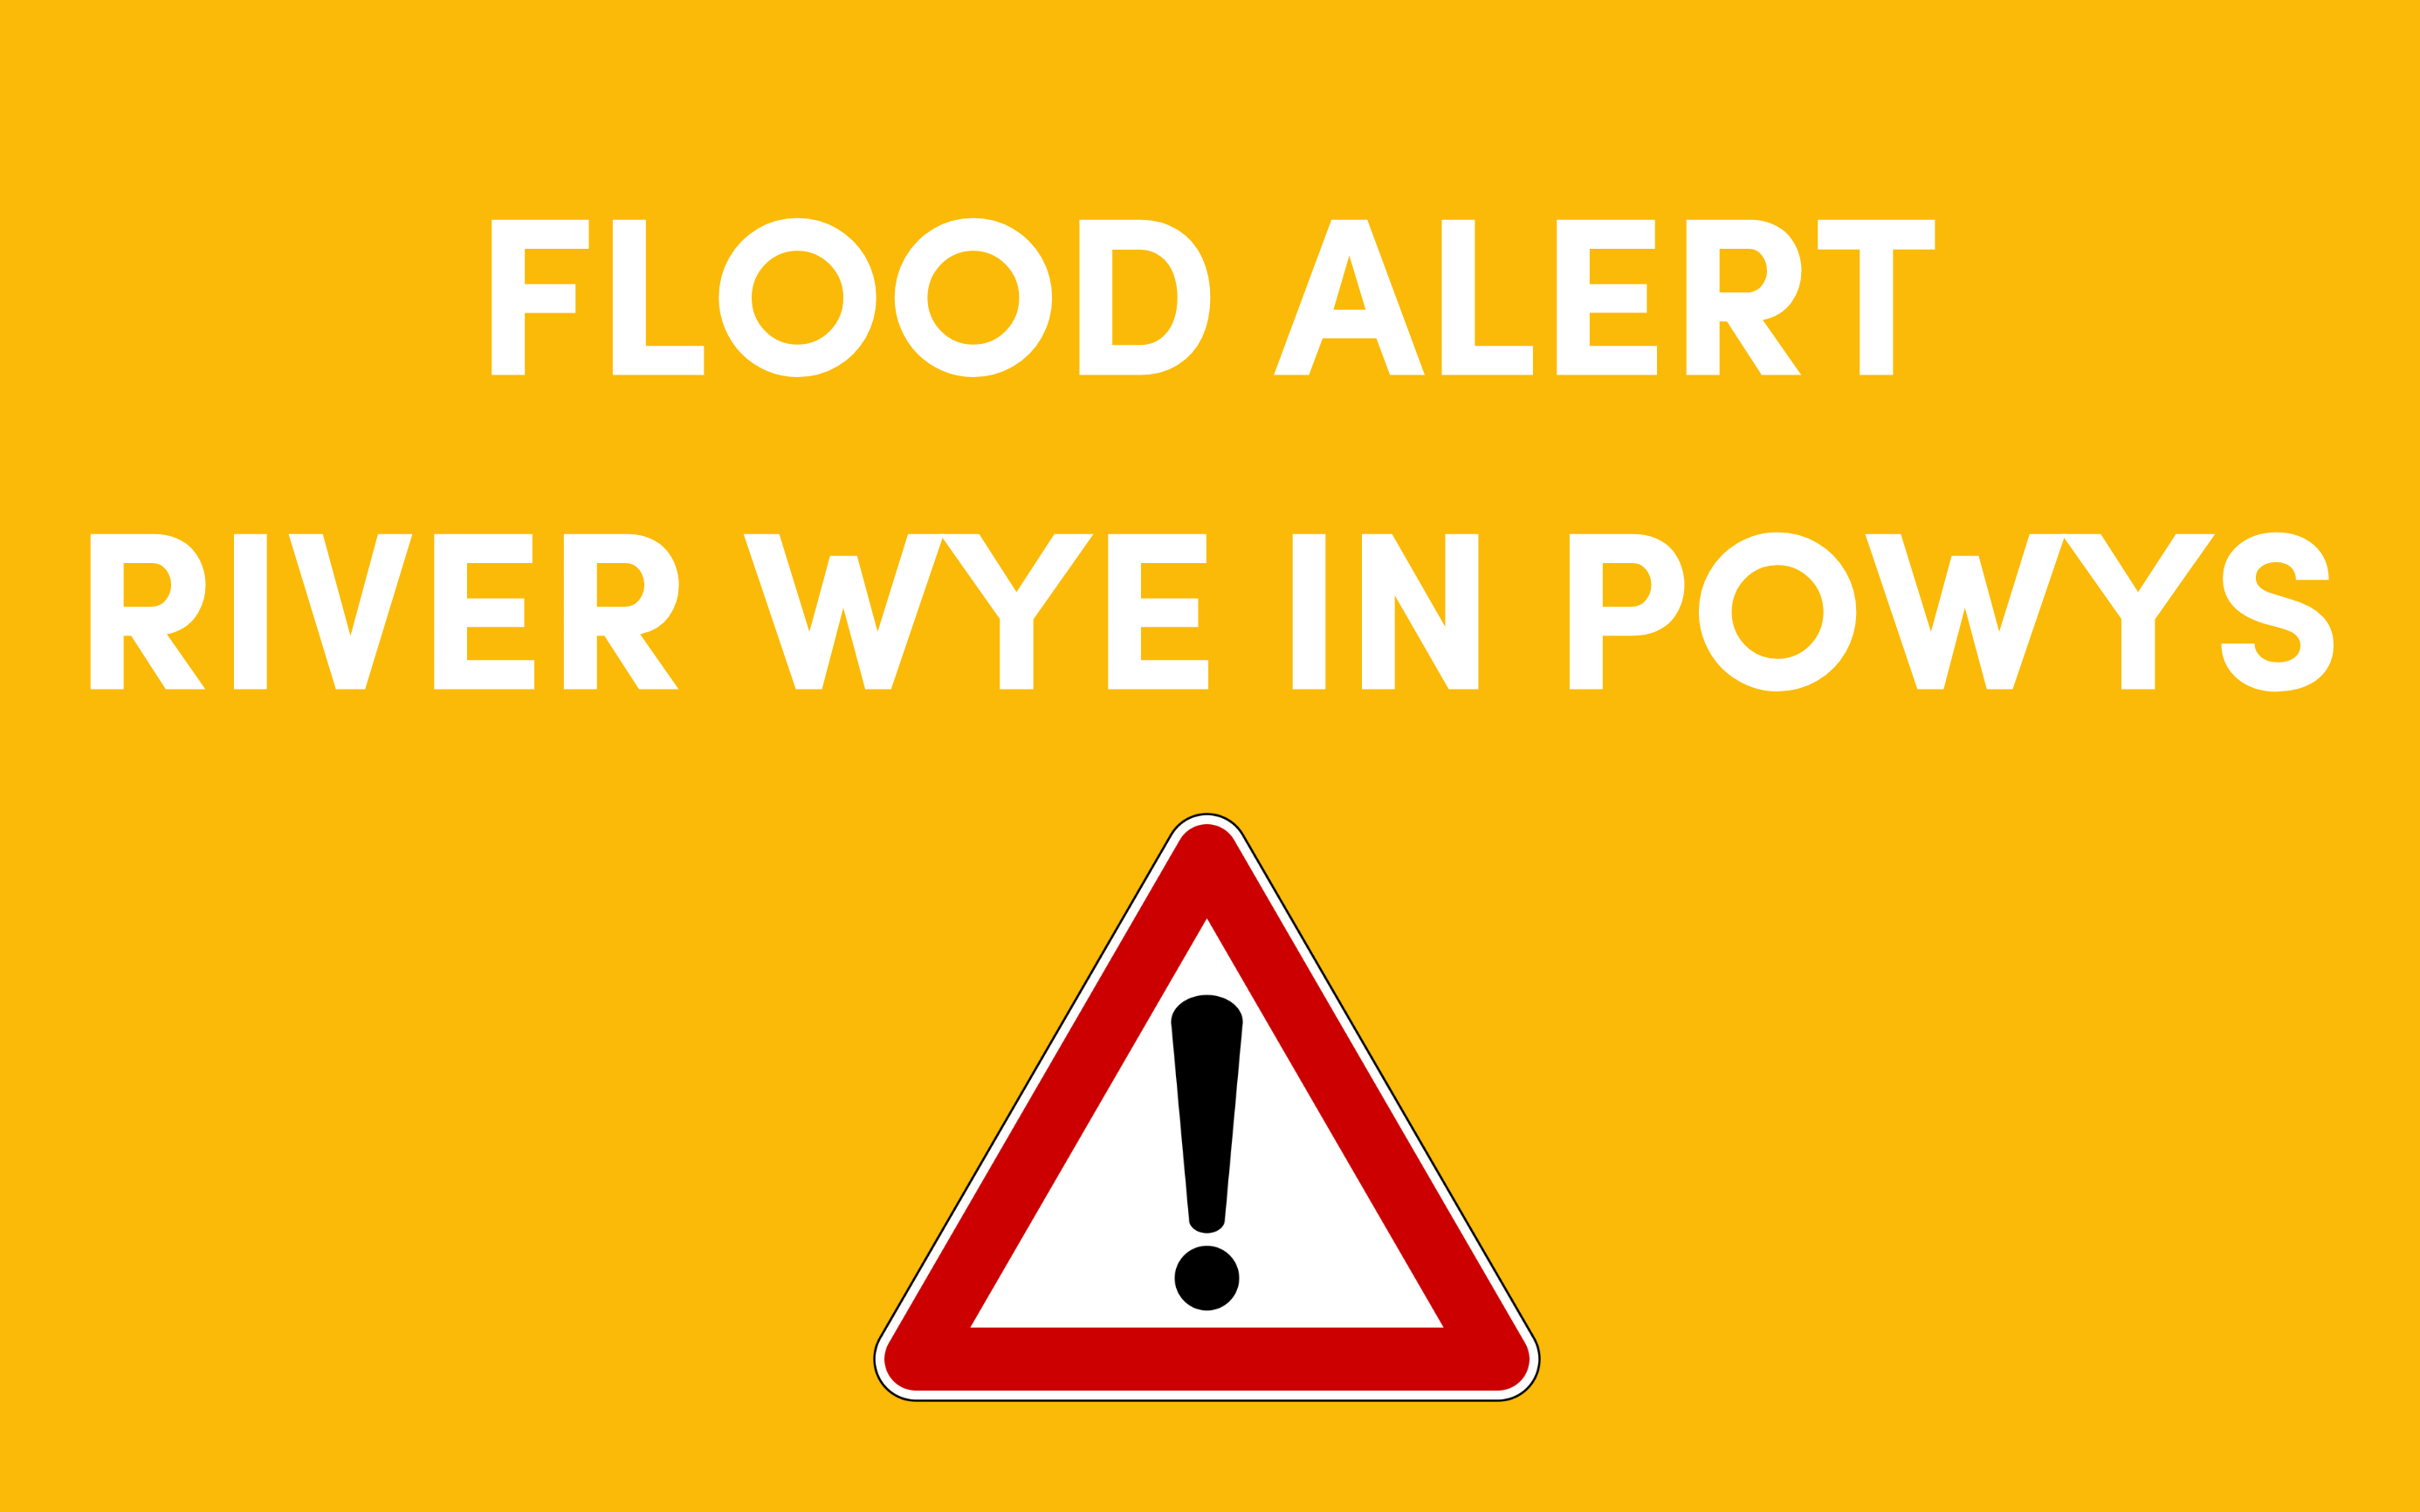 FLOODING | Flood Alert issued on the River Wye in Powys – FULL DETAILS